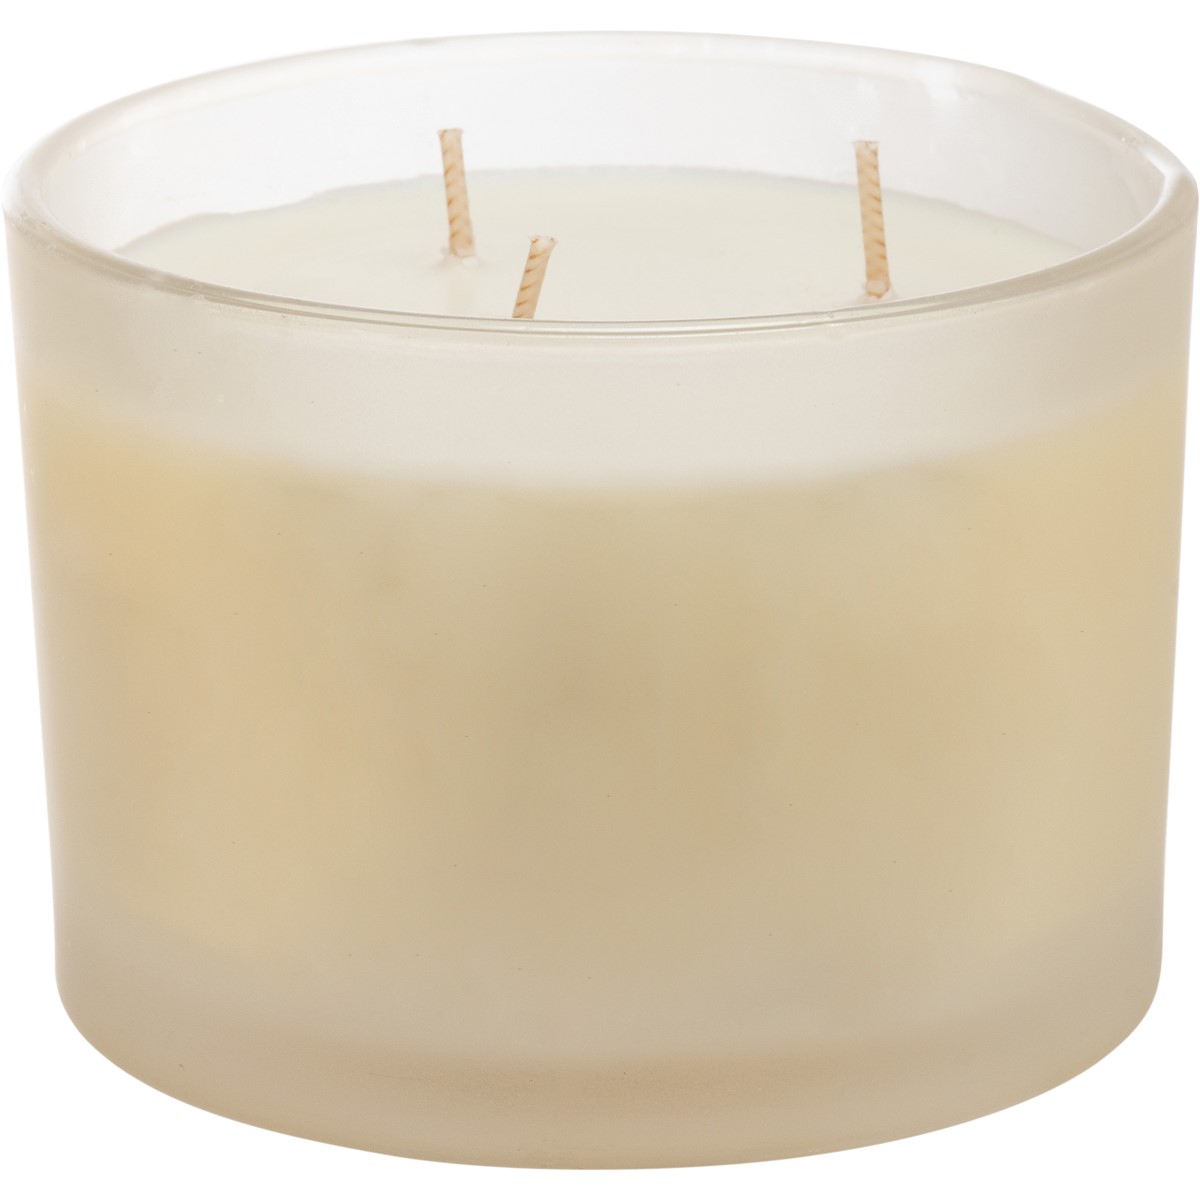 Thou Shalt Not Try Me Jar Candle - Soy Wax, Glass, Cotton